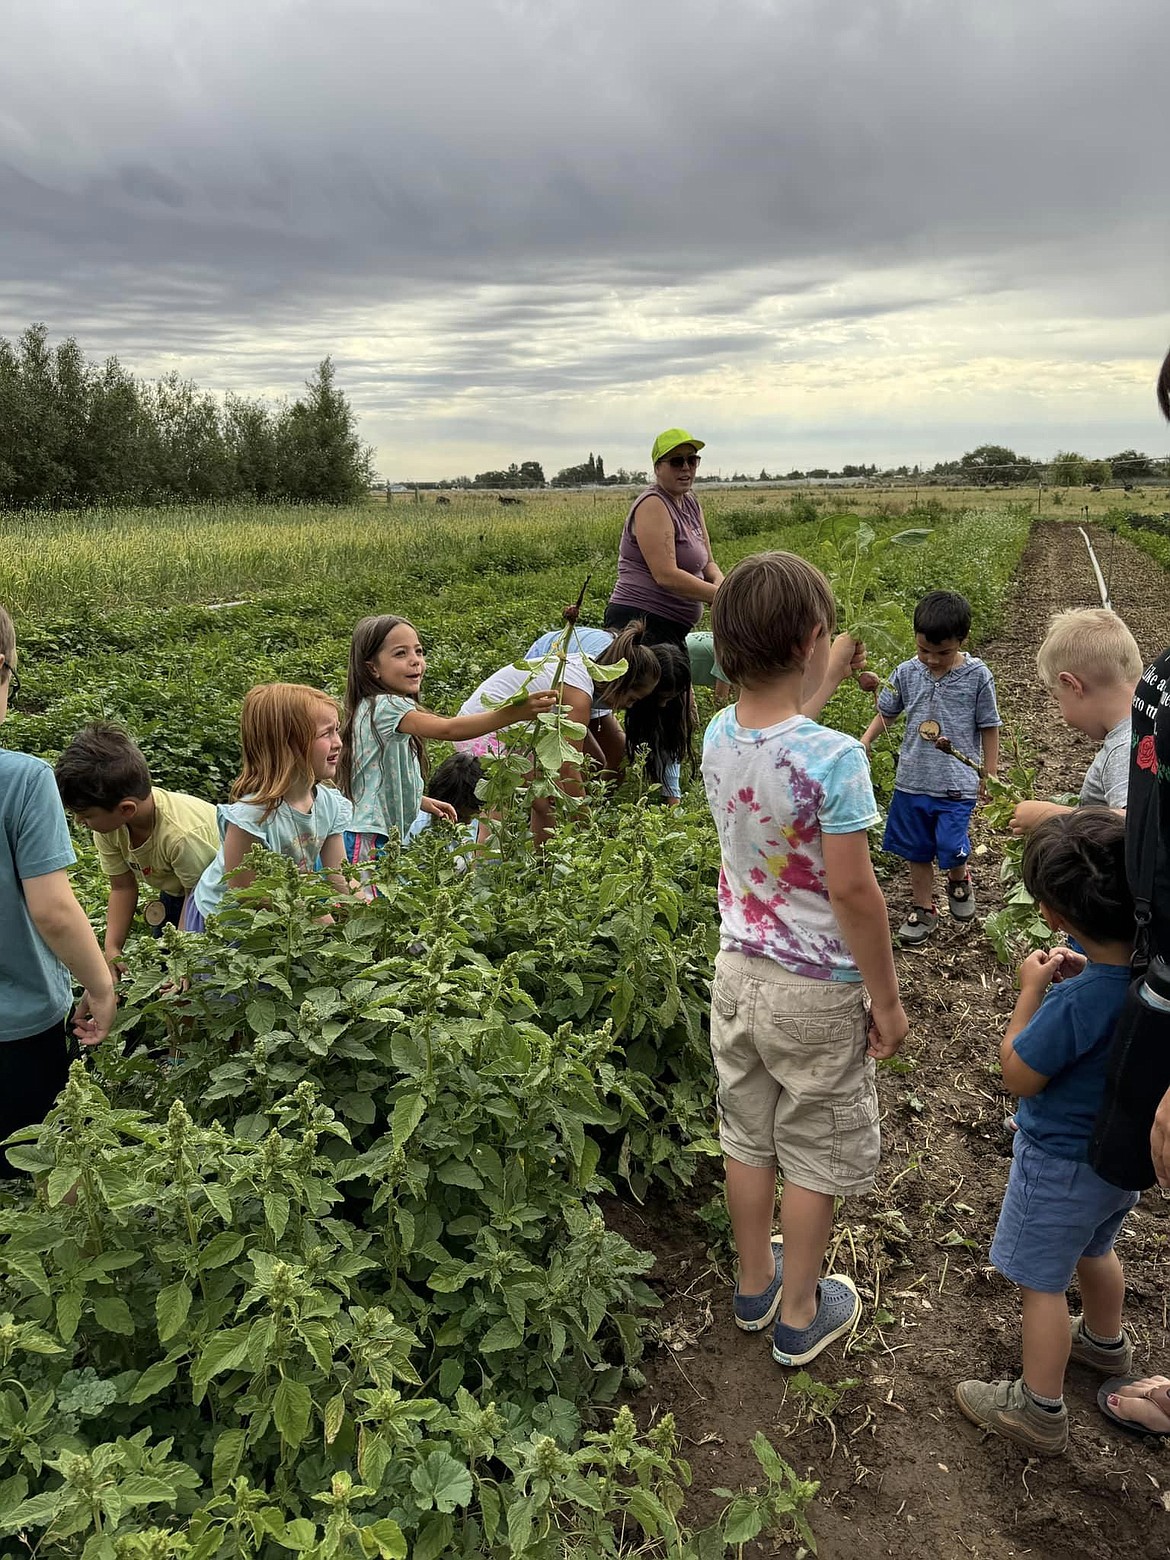 Children explore and learn about the plants at Cloudview Farm. This week has had them picking radishes, planting flowers and veggies and learning about pond life at the farm.